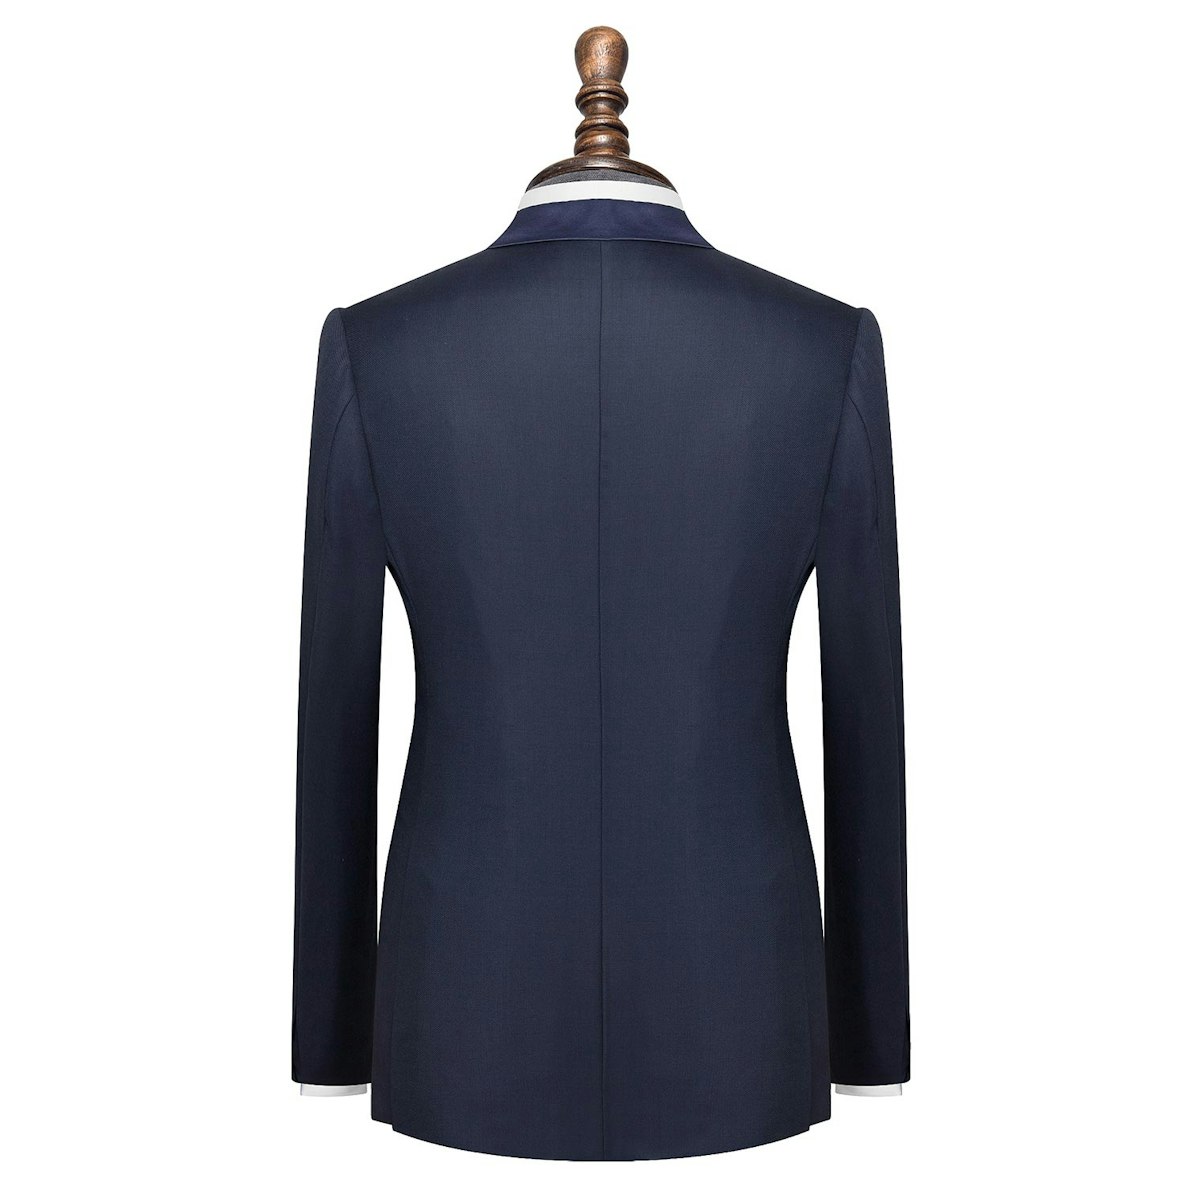 InStitchu Collection The Harlow mens suit